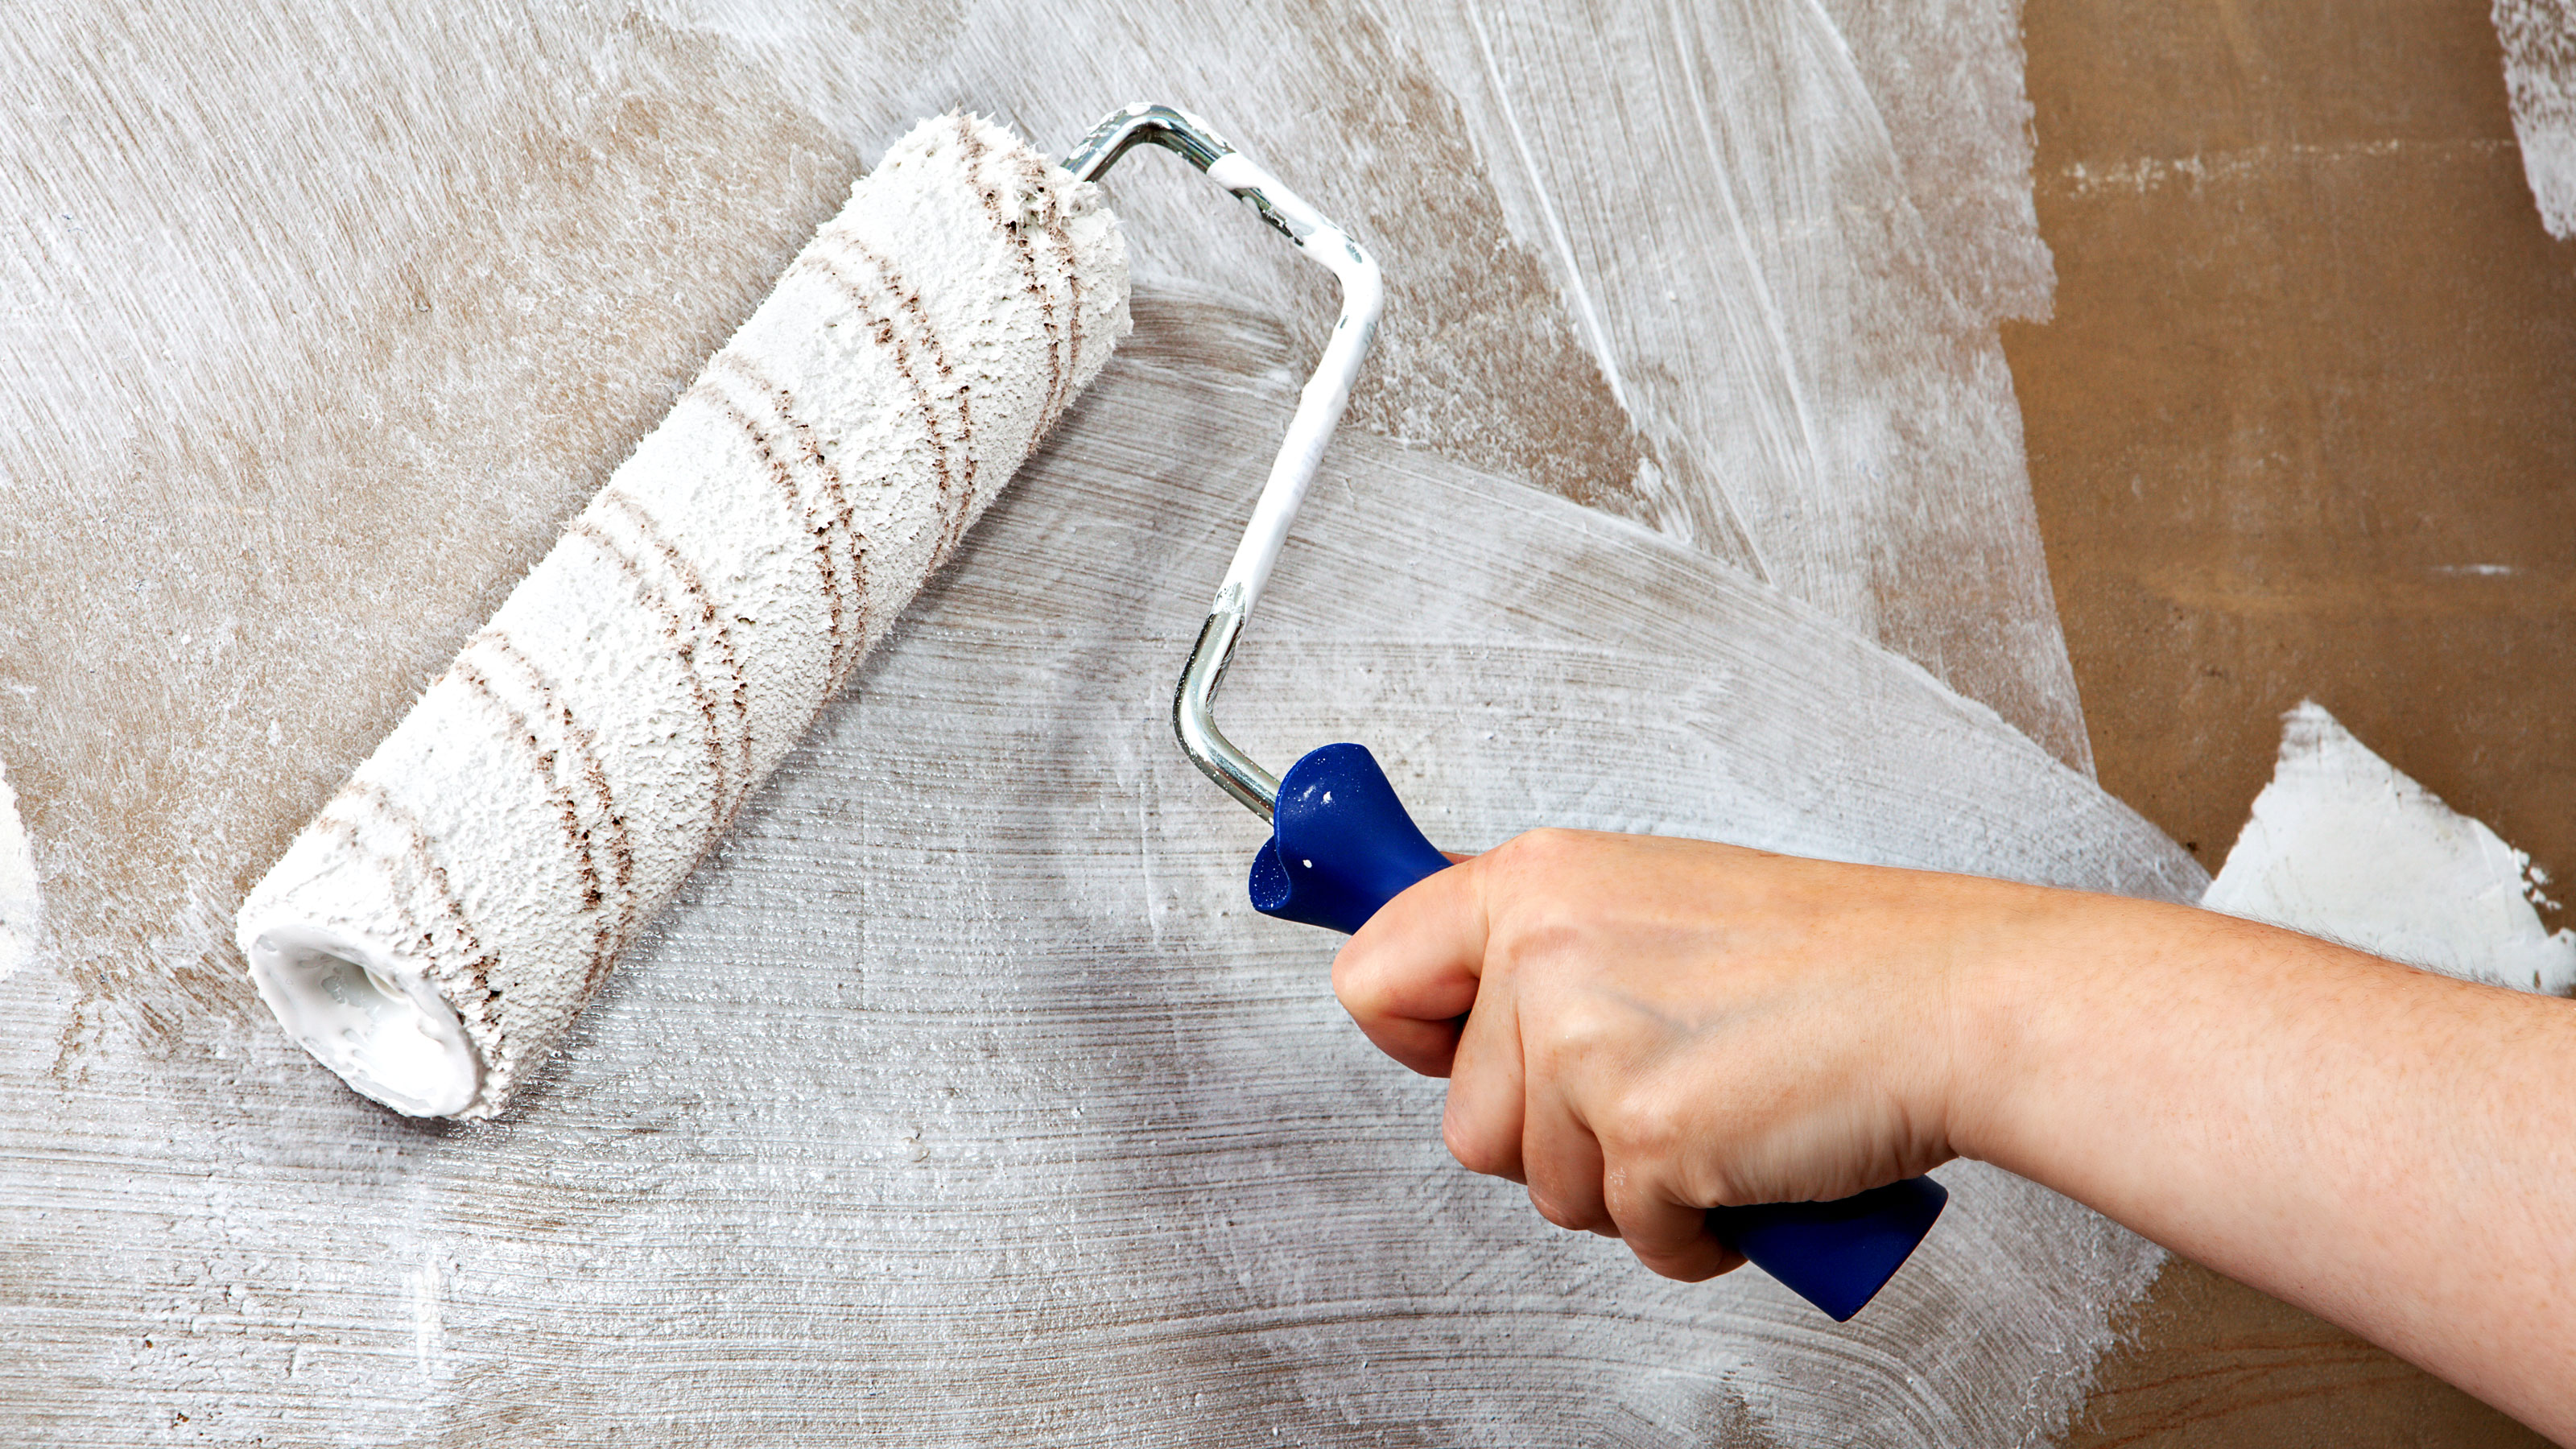 Wallpapering new plaster: Pro tips for the perfect prep | Homebuilding